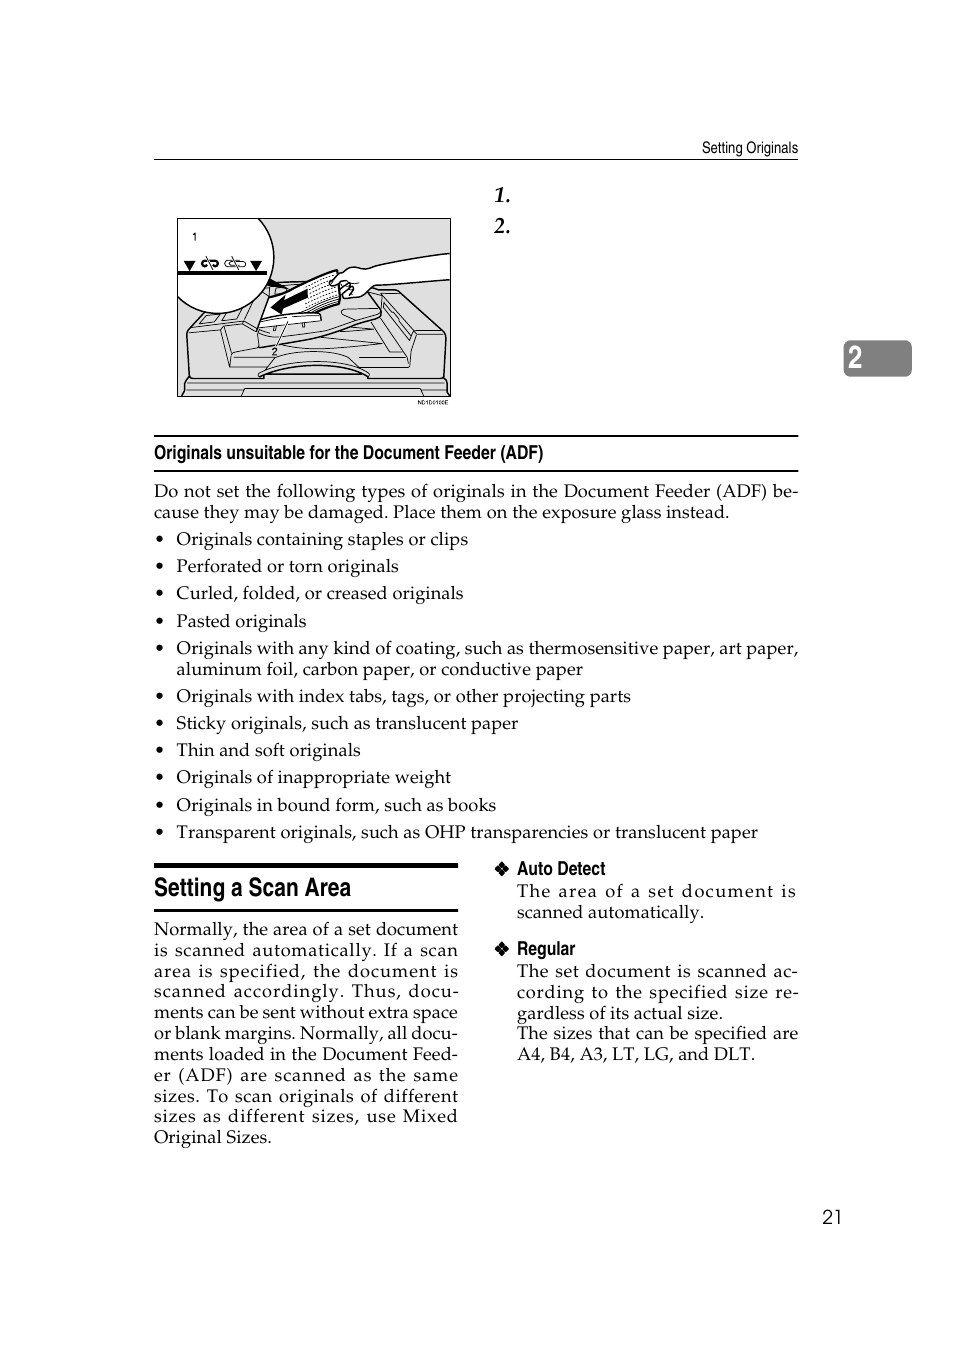 Setting a scan area, P.21 “setting, A scan area | LG Option Type 1045 User Manual | Page 29 / 89